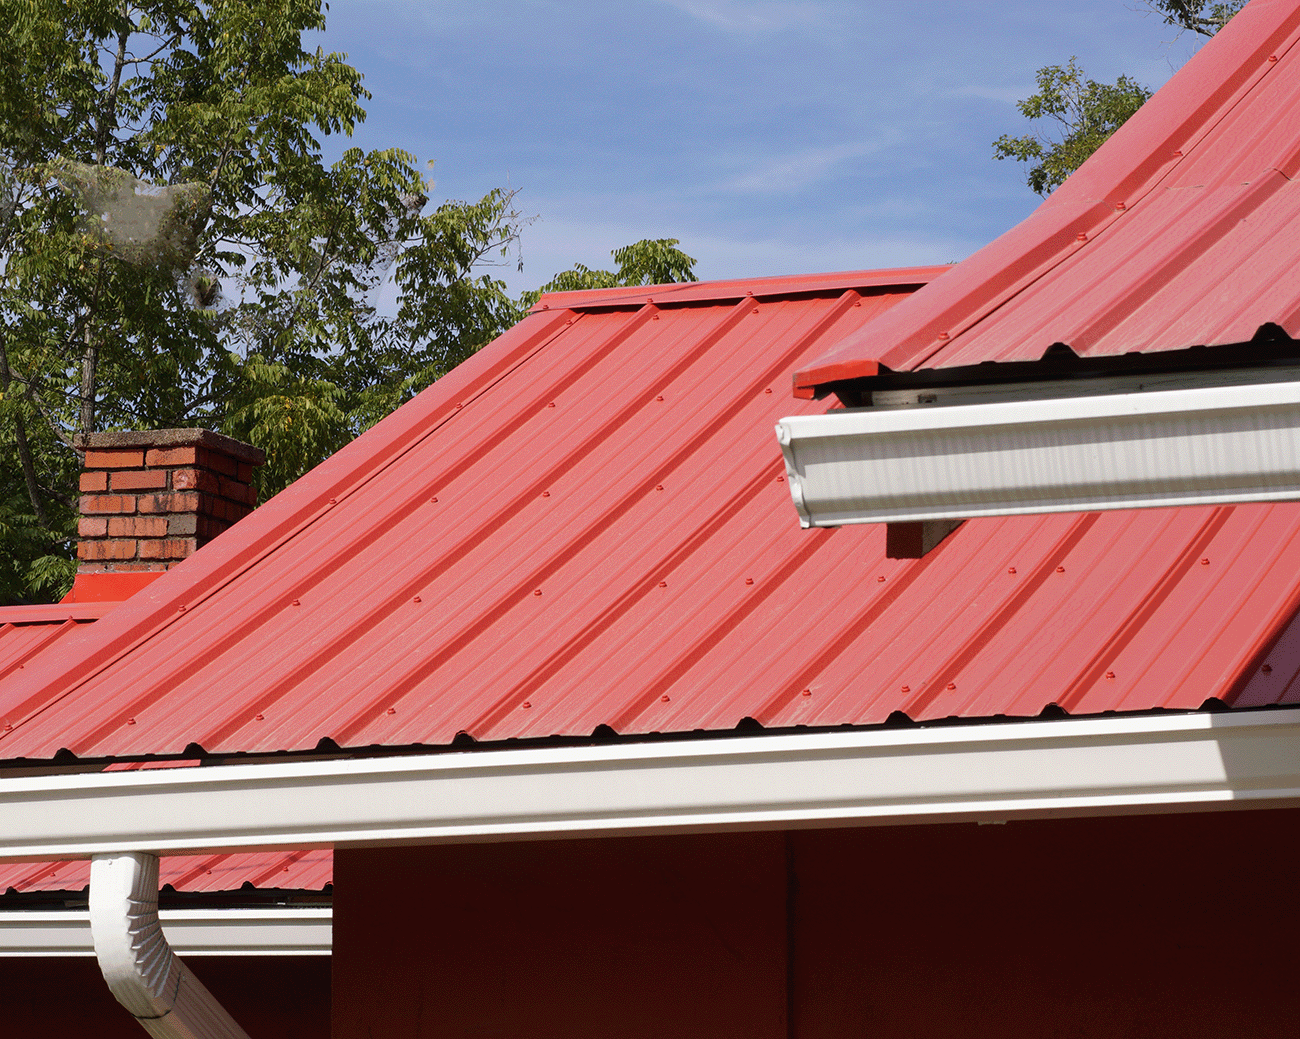 Get all your metal roof questions answered here.